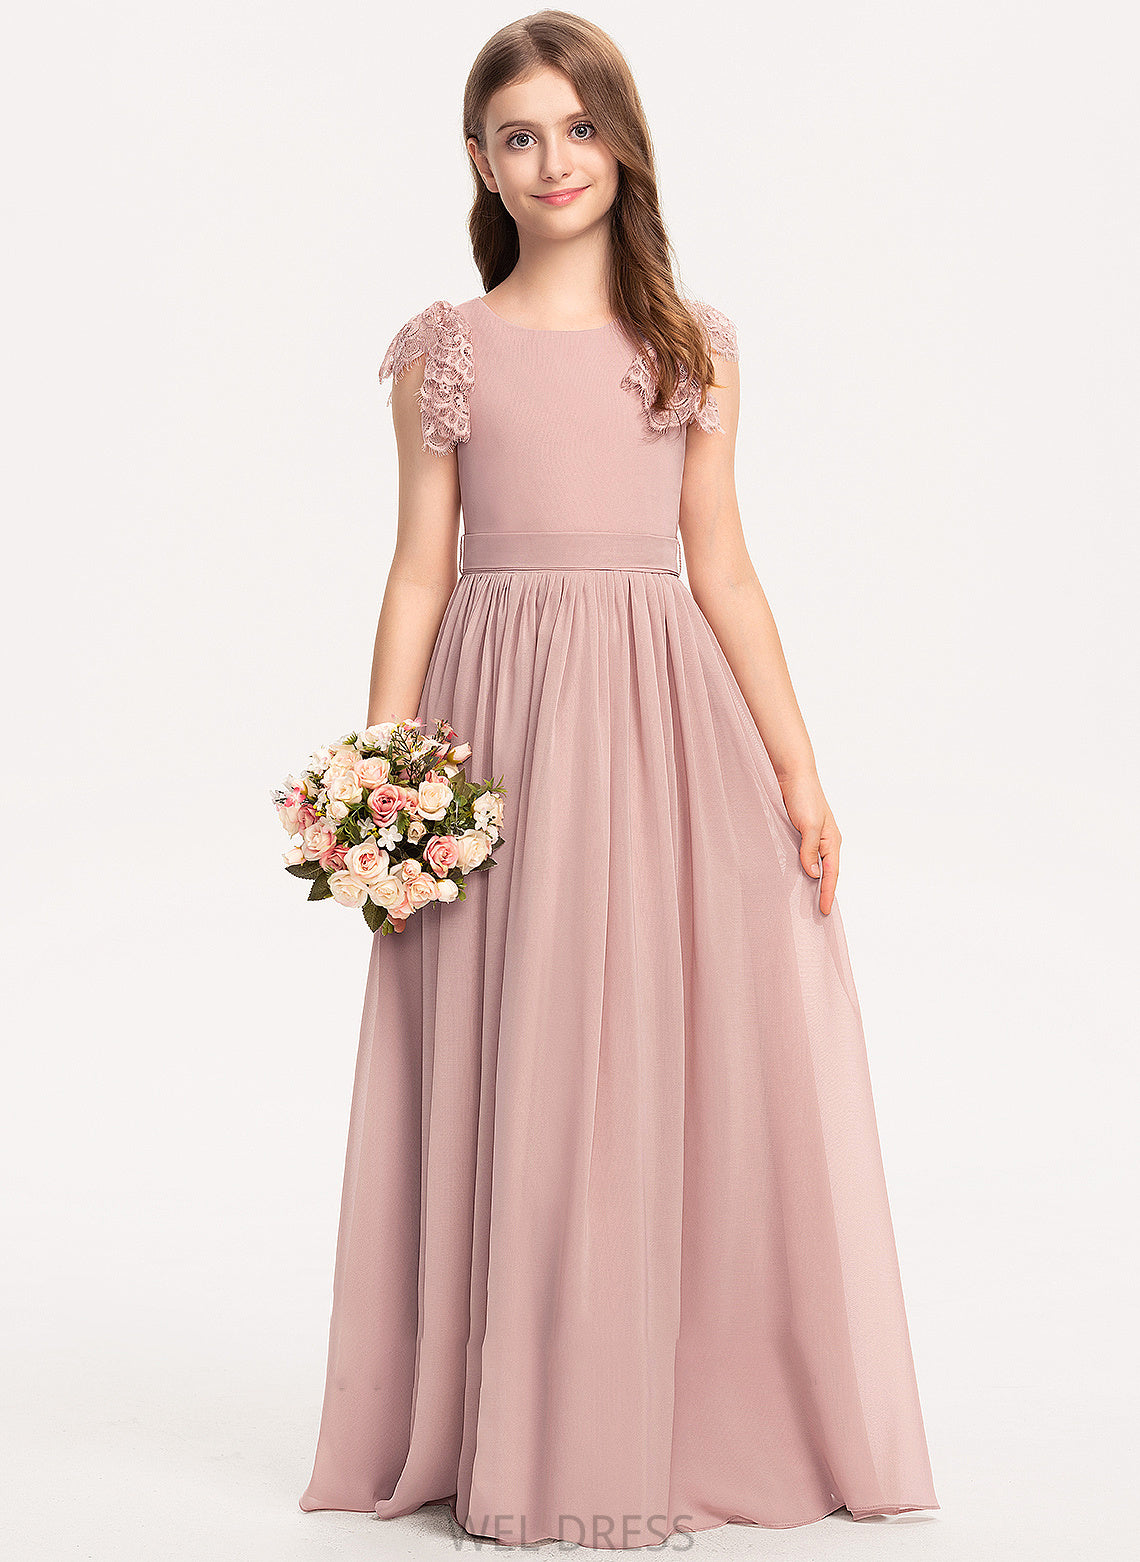 Chiffon Bow(s) Neck Junior Bridesmaid Dresses Floor-Length With A-Line Lace Miracle Scoop